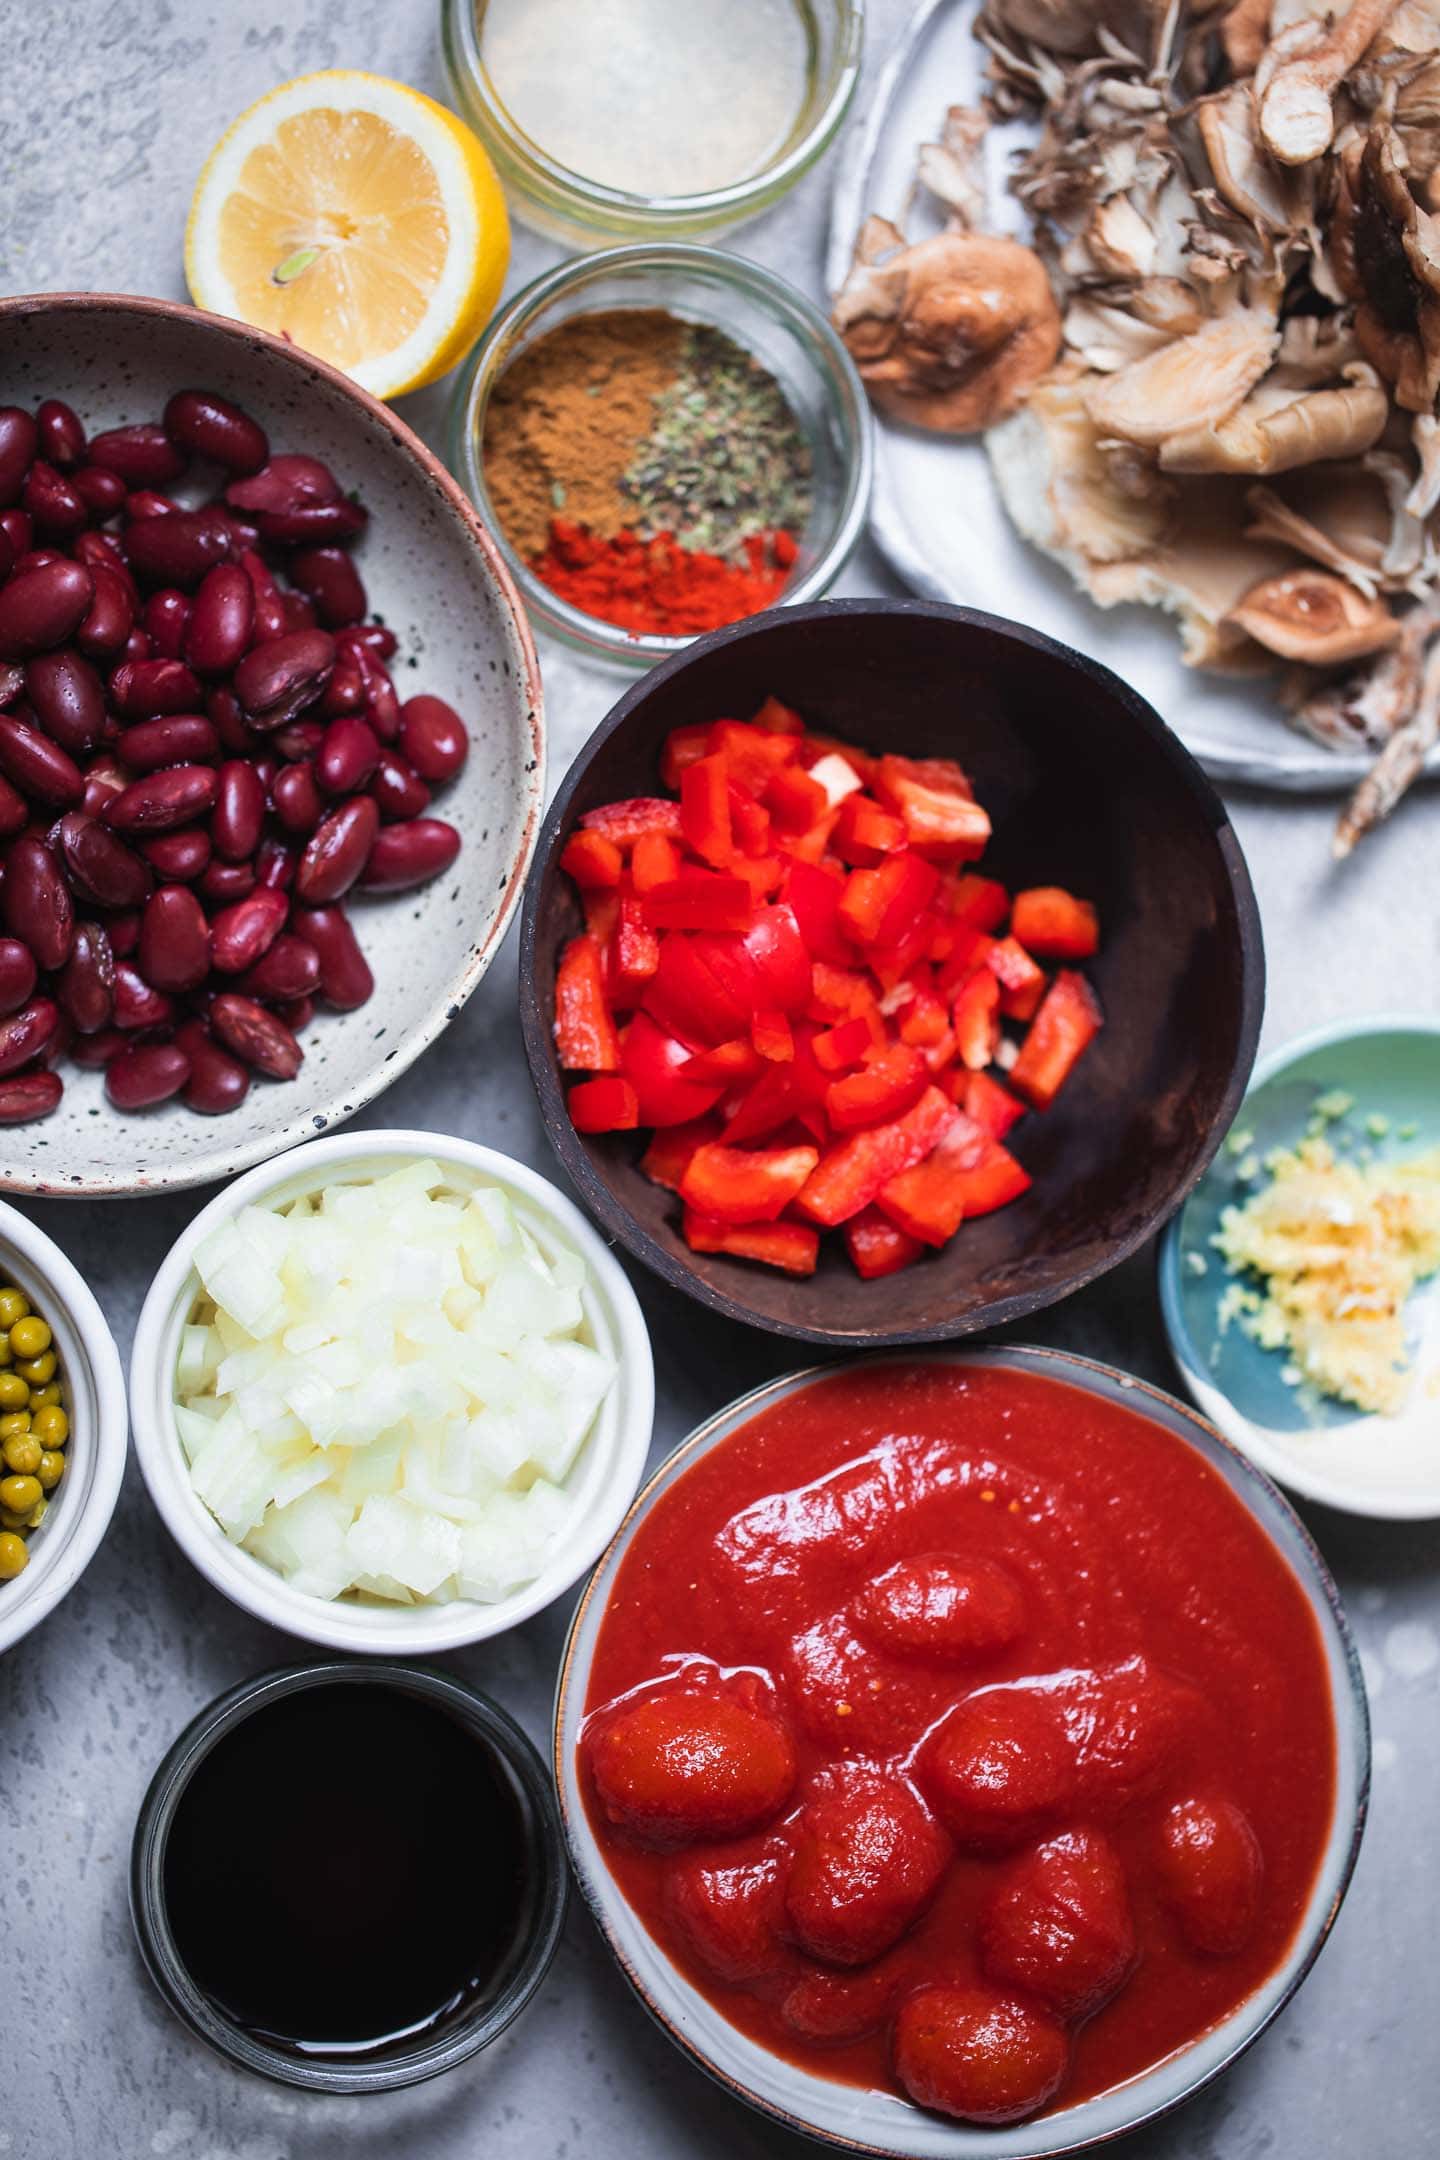 Ingredients for spicy kidney beans